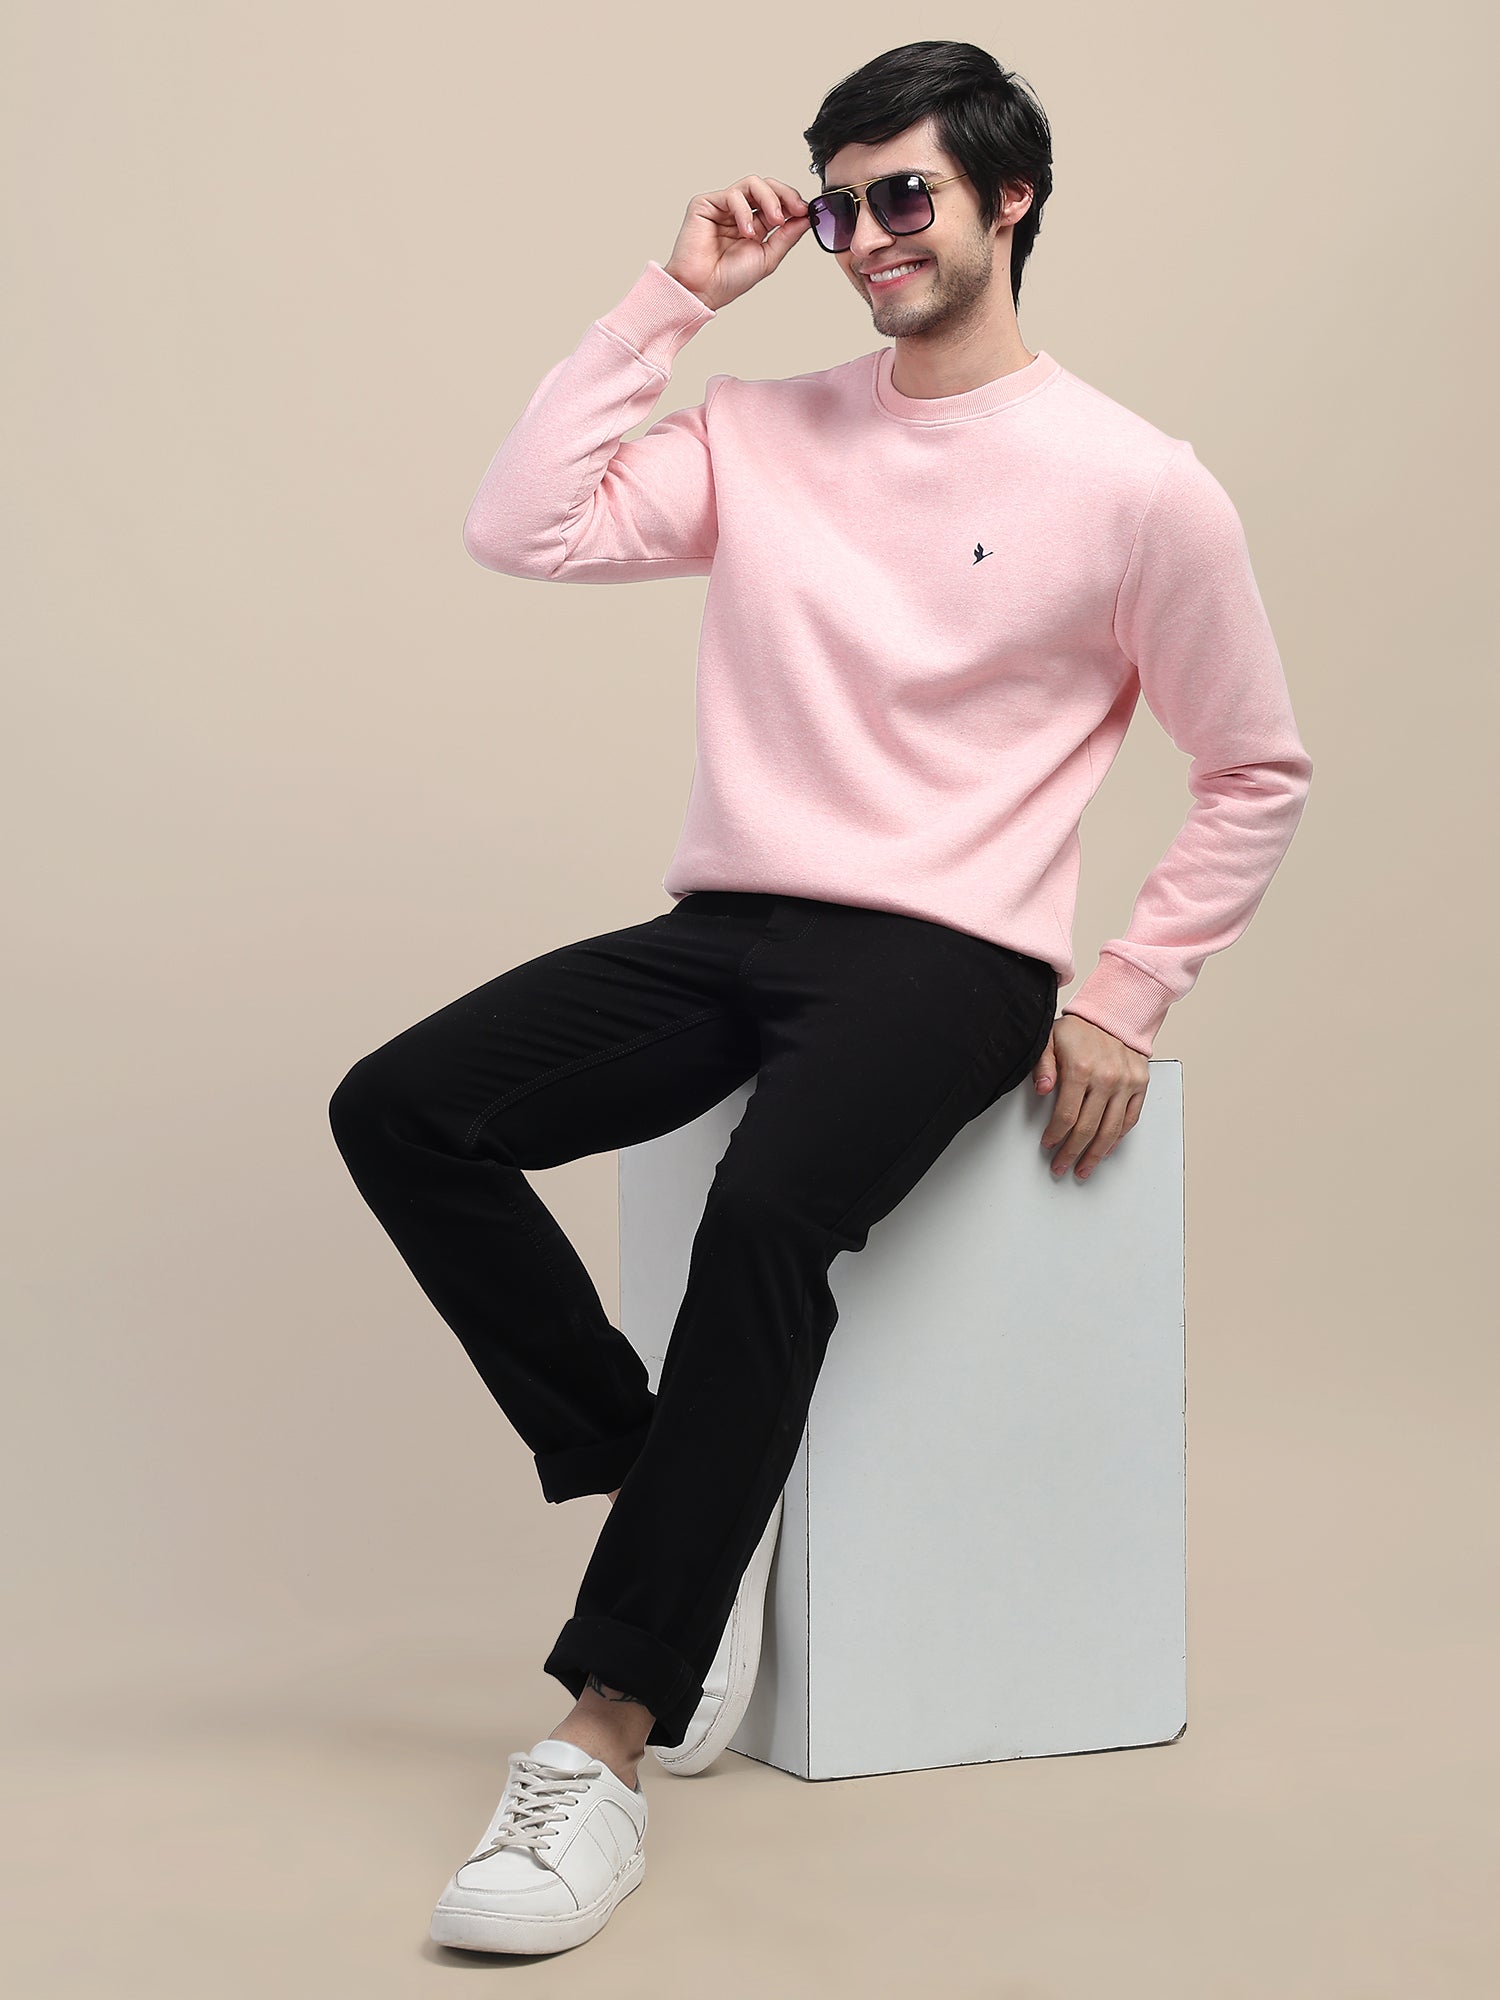 AMSWAN MEN'S PINK SOLID COMFORT: PREMIUM COTTON SWEATSHIRT FOR TIMELESS STYLE AND COZY ELEGANCE